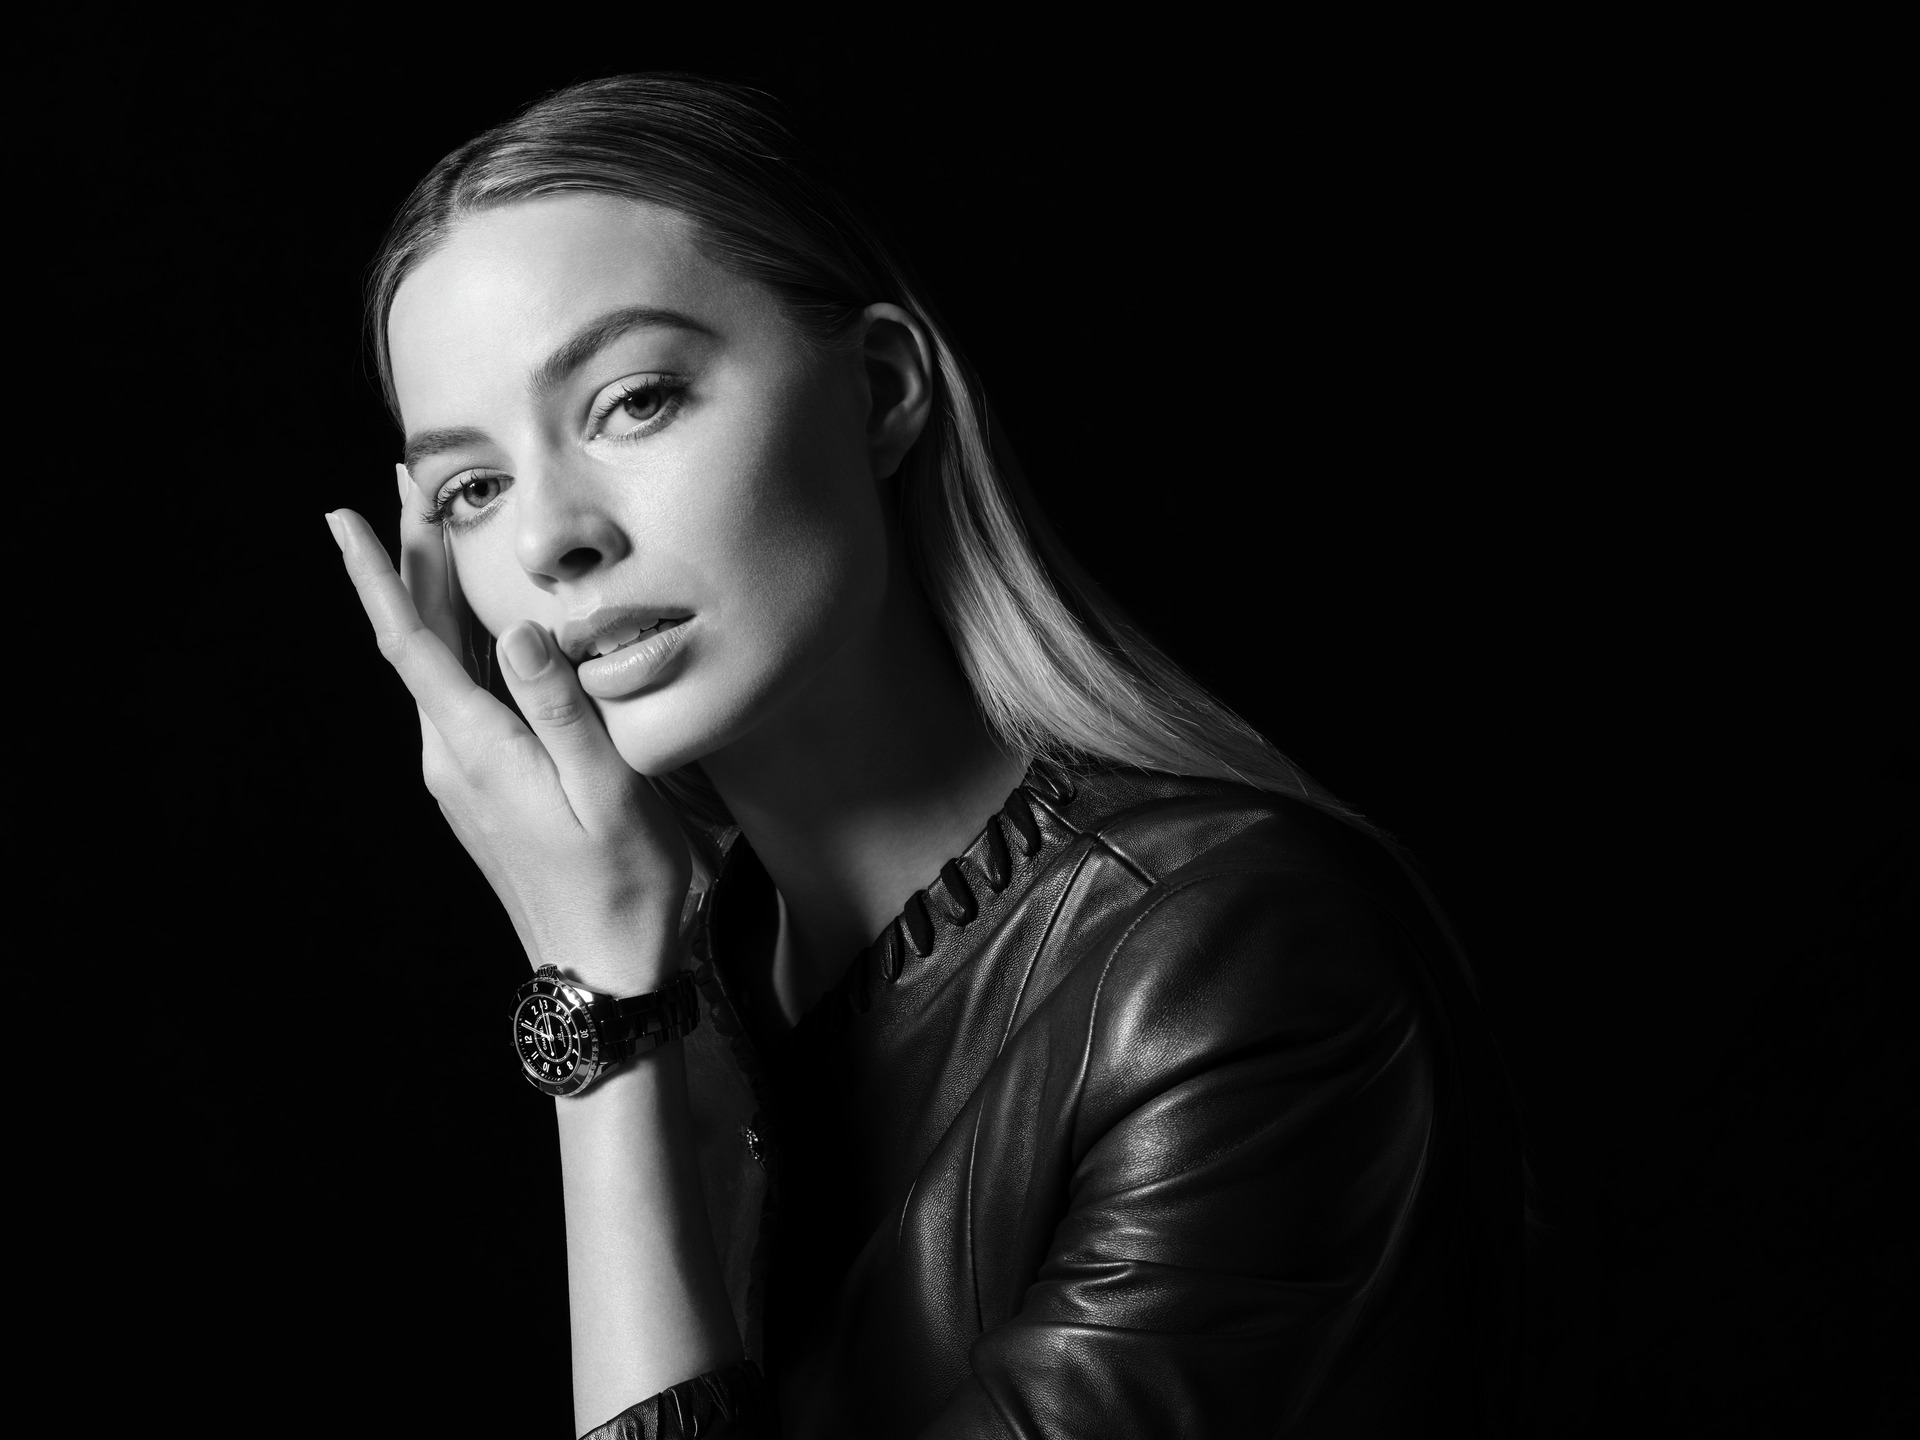 Margot Robbie is the New Face of Chanel's J12 Watch - A&E Magazine